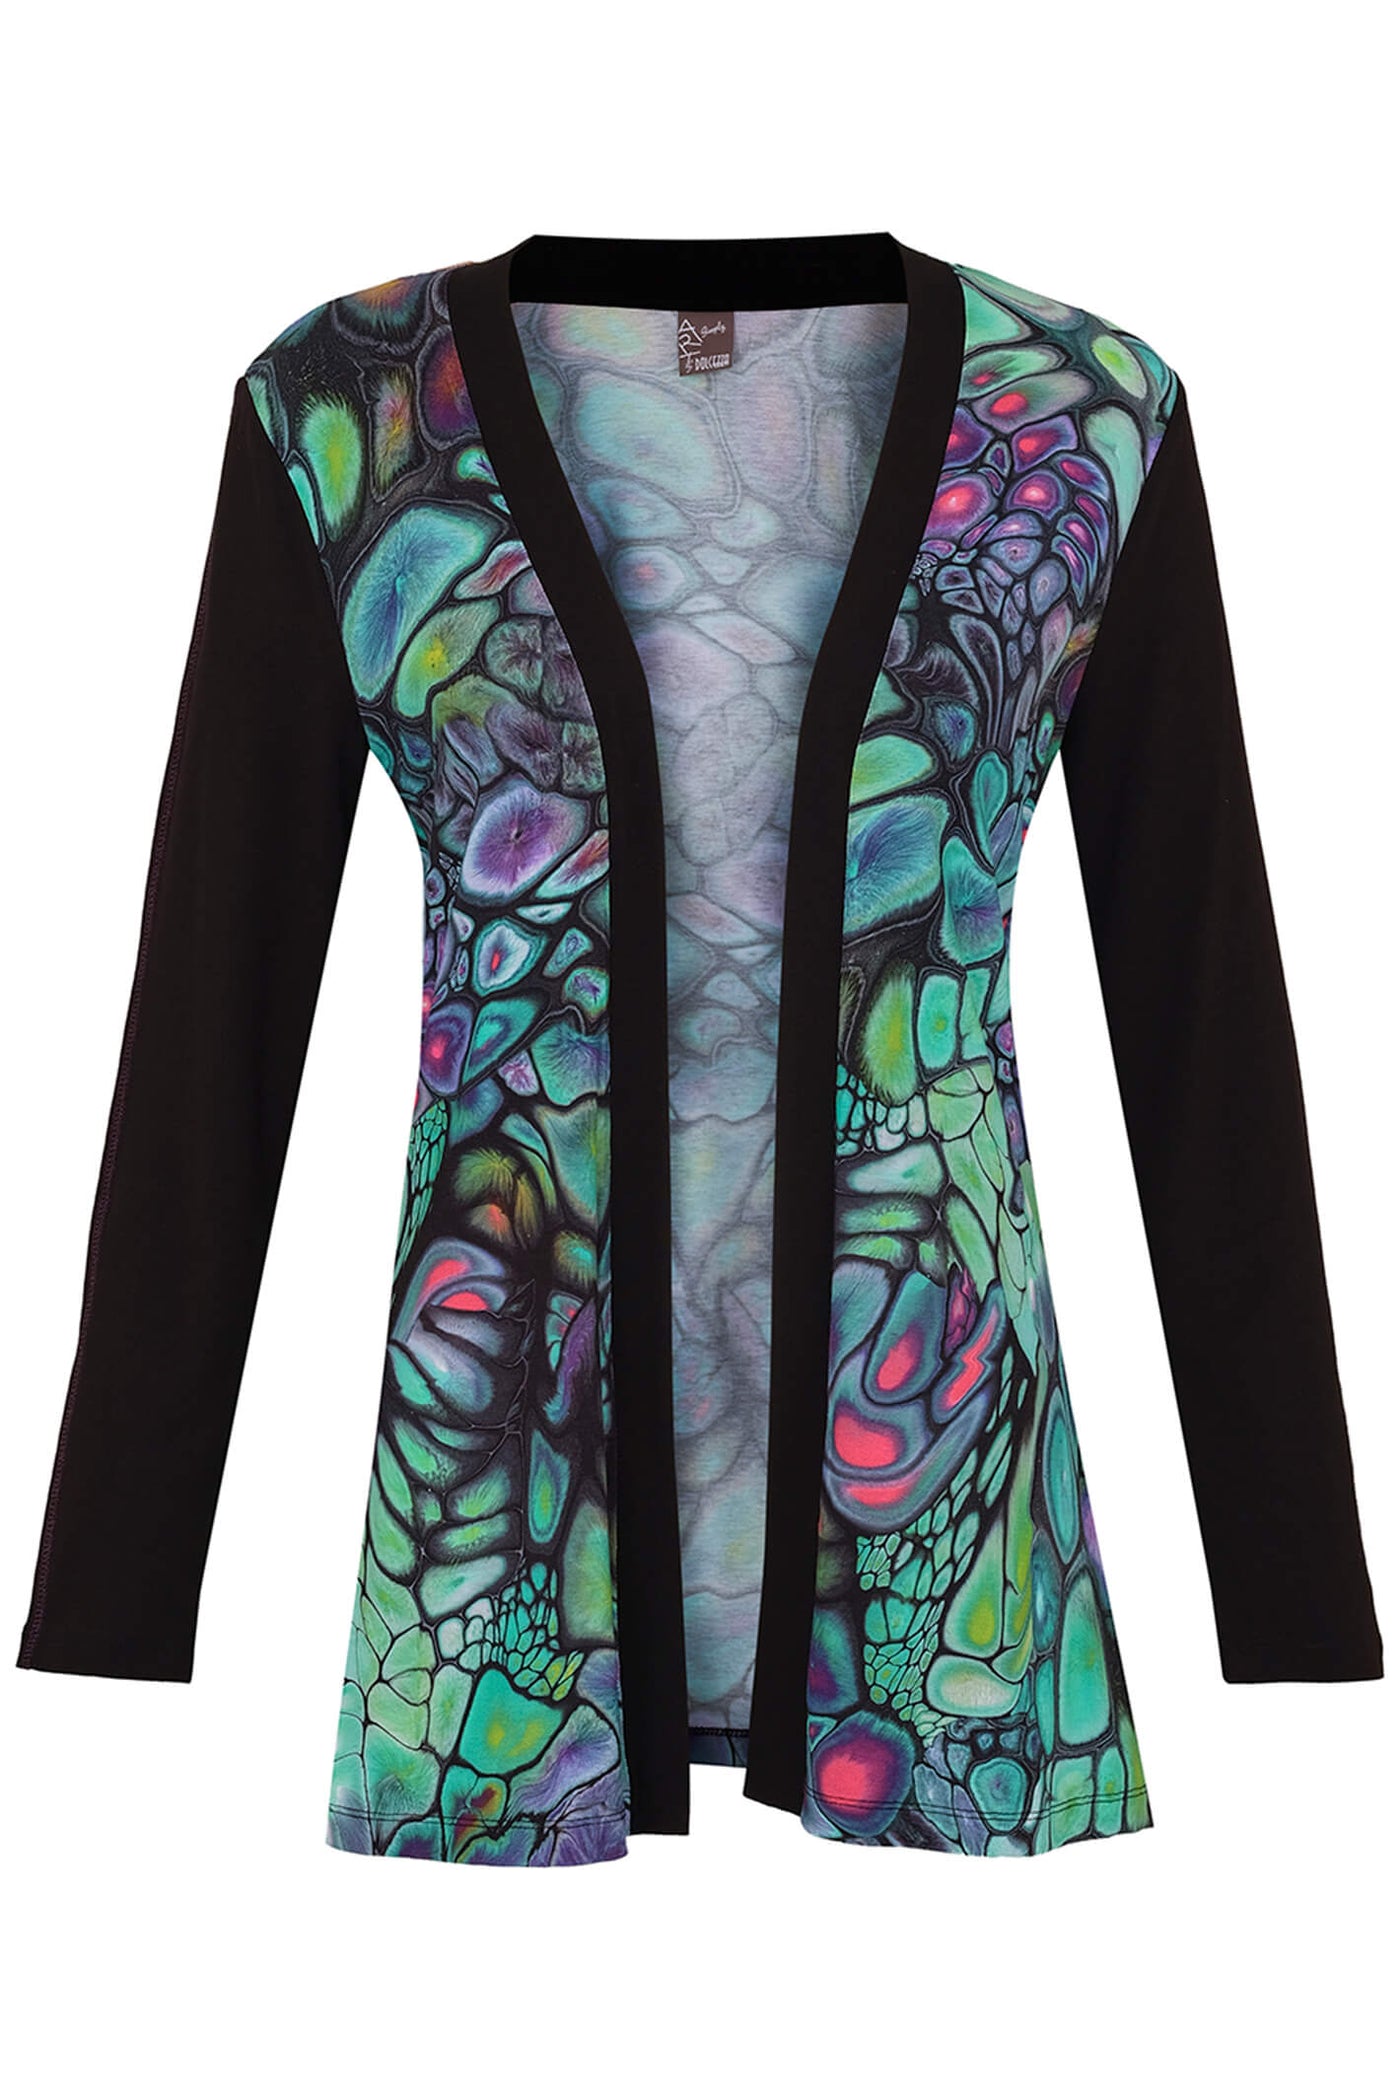 Dolcezza 73663 Green Fantasy Print Open Front Cardigan - Rouge Boutique